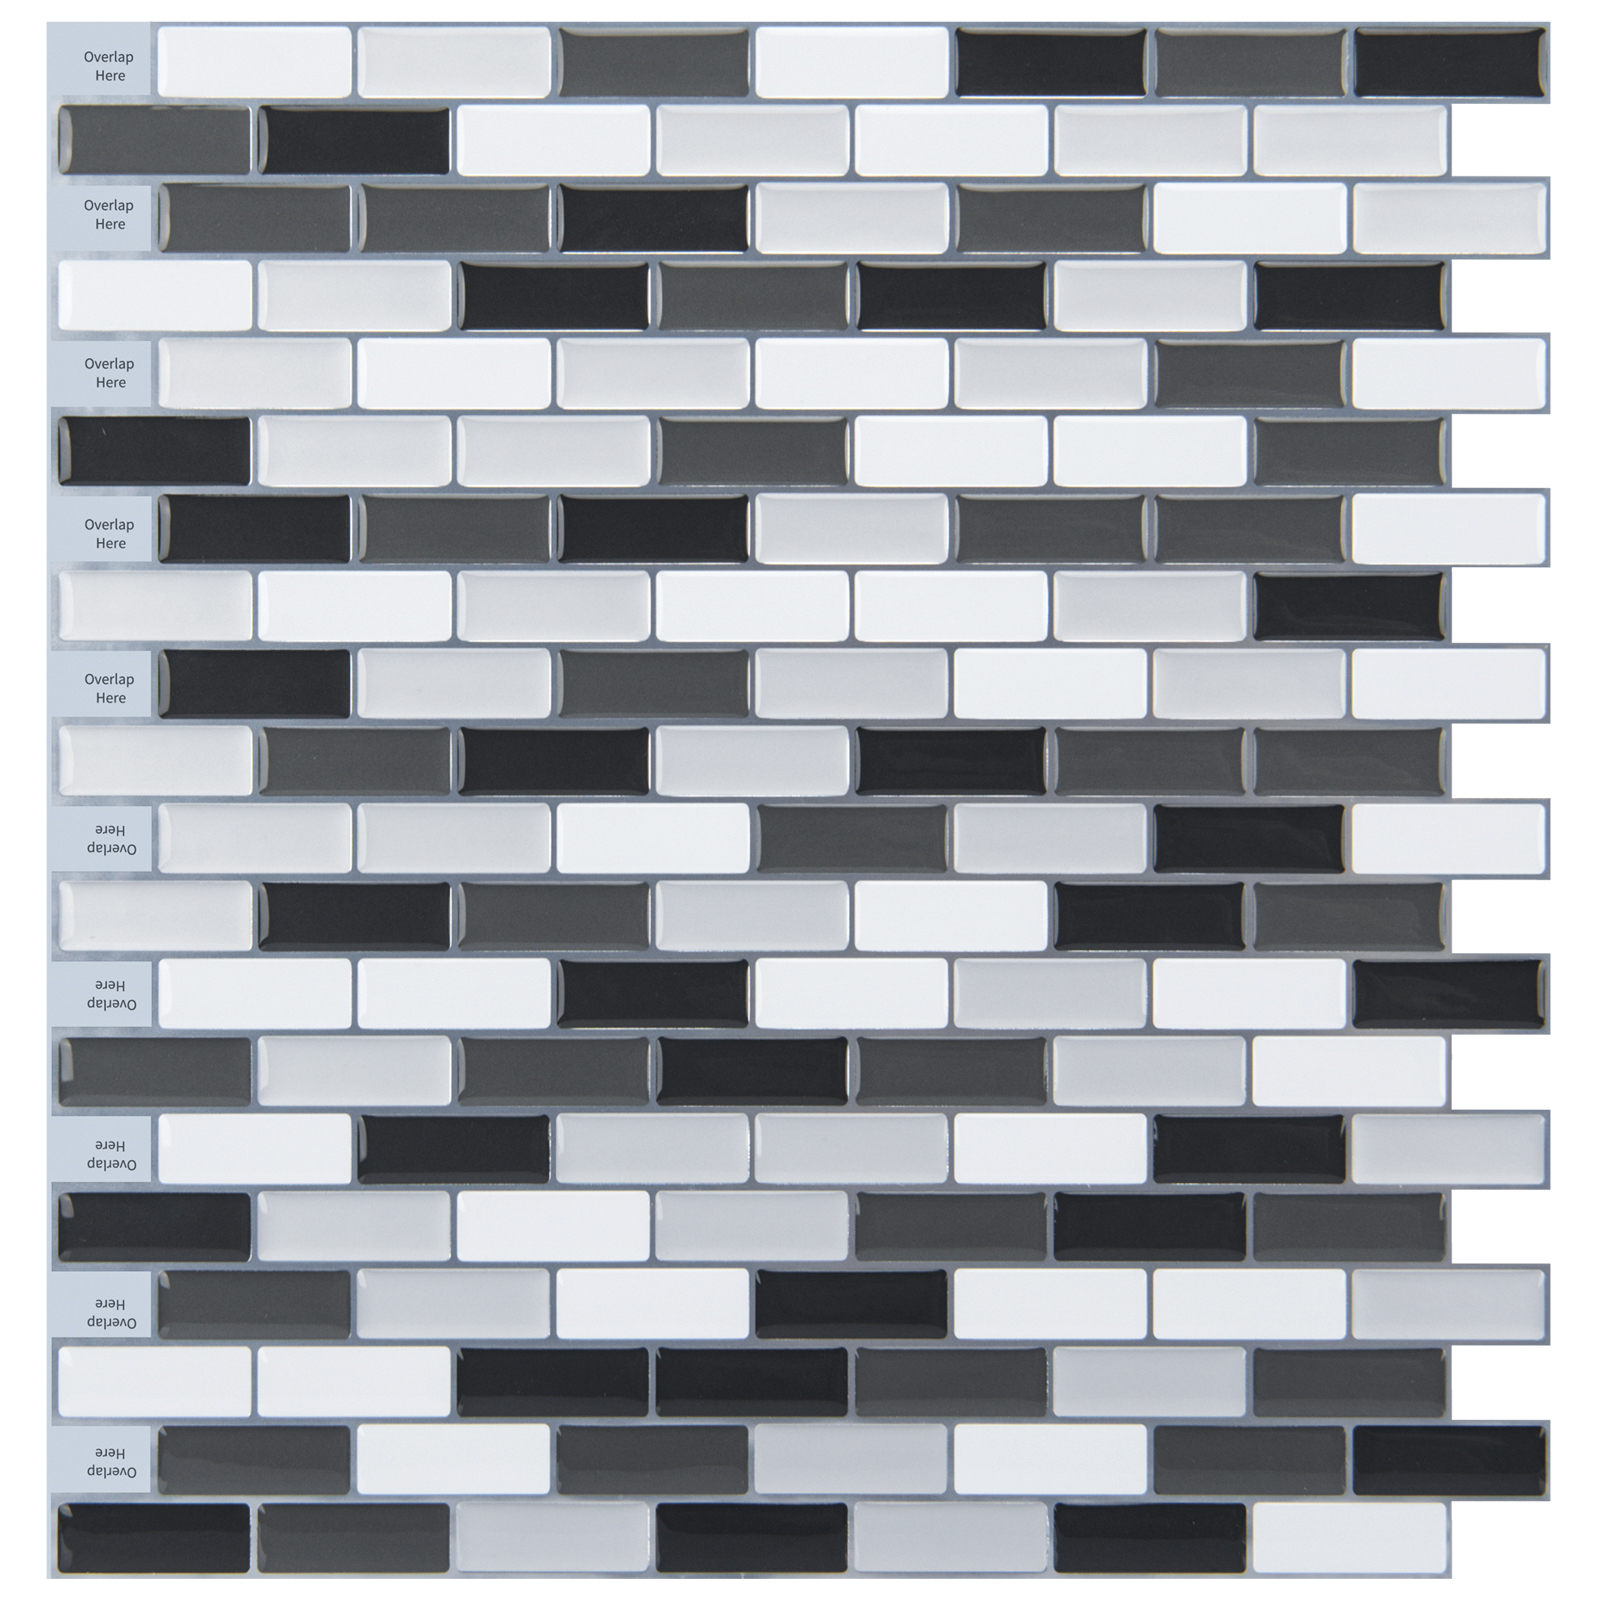 A17001P20 -20 Sheets  Peel and Stick Tile Backsplash Extra Sticky, Mosaic Design in Black,Dark Gray, Med Gray and White for Kitchen, Bathroom